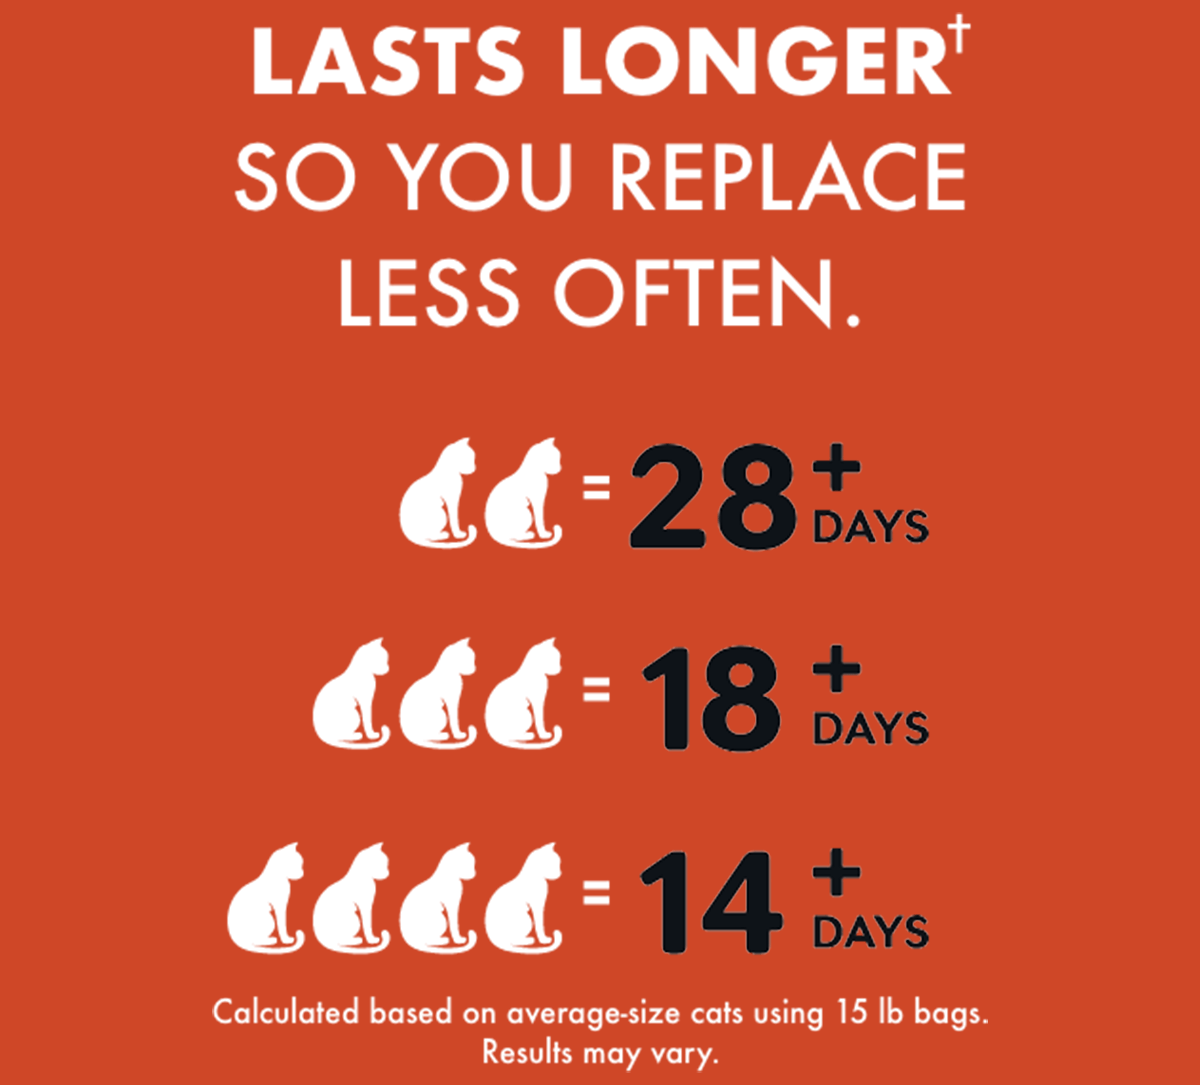 Lasts longer† so you replace less often. ( 2 cats = 28+ days. 3 cats = 18+ days. 4 cats = 14+ days. ) Calculated based on average-size cats using 15 lb bags. Results may vary.